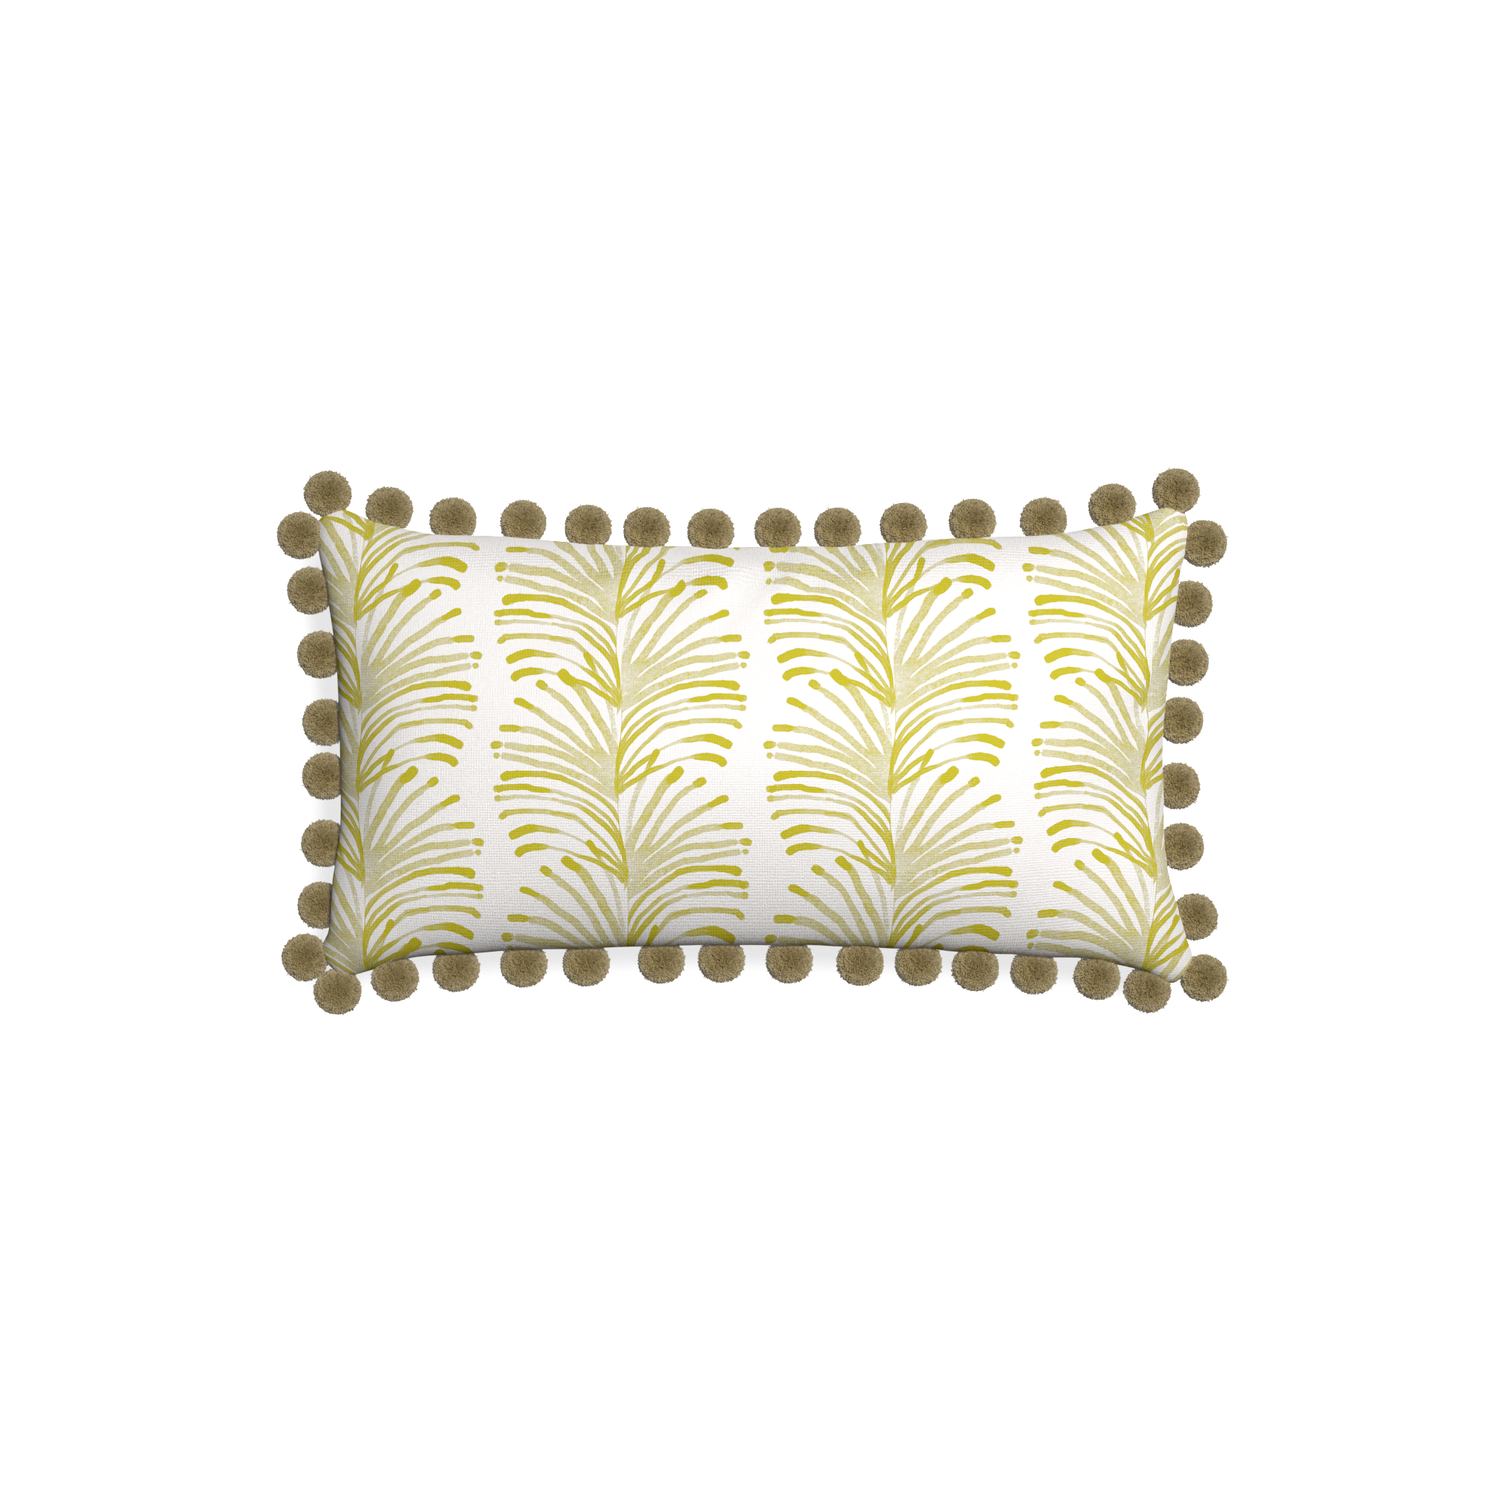 Petite-lumbar emma chartreuse custom yellow stripe chartreusepillow with olive pom pom on white background